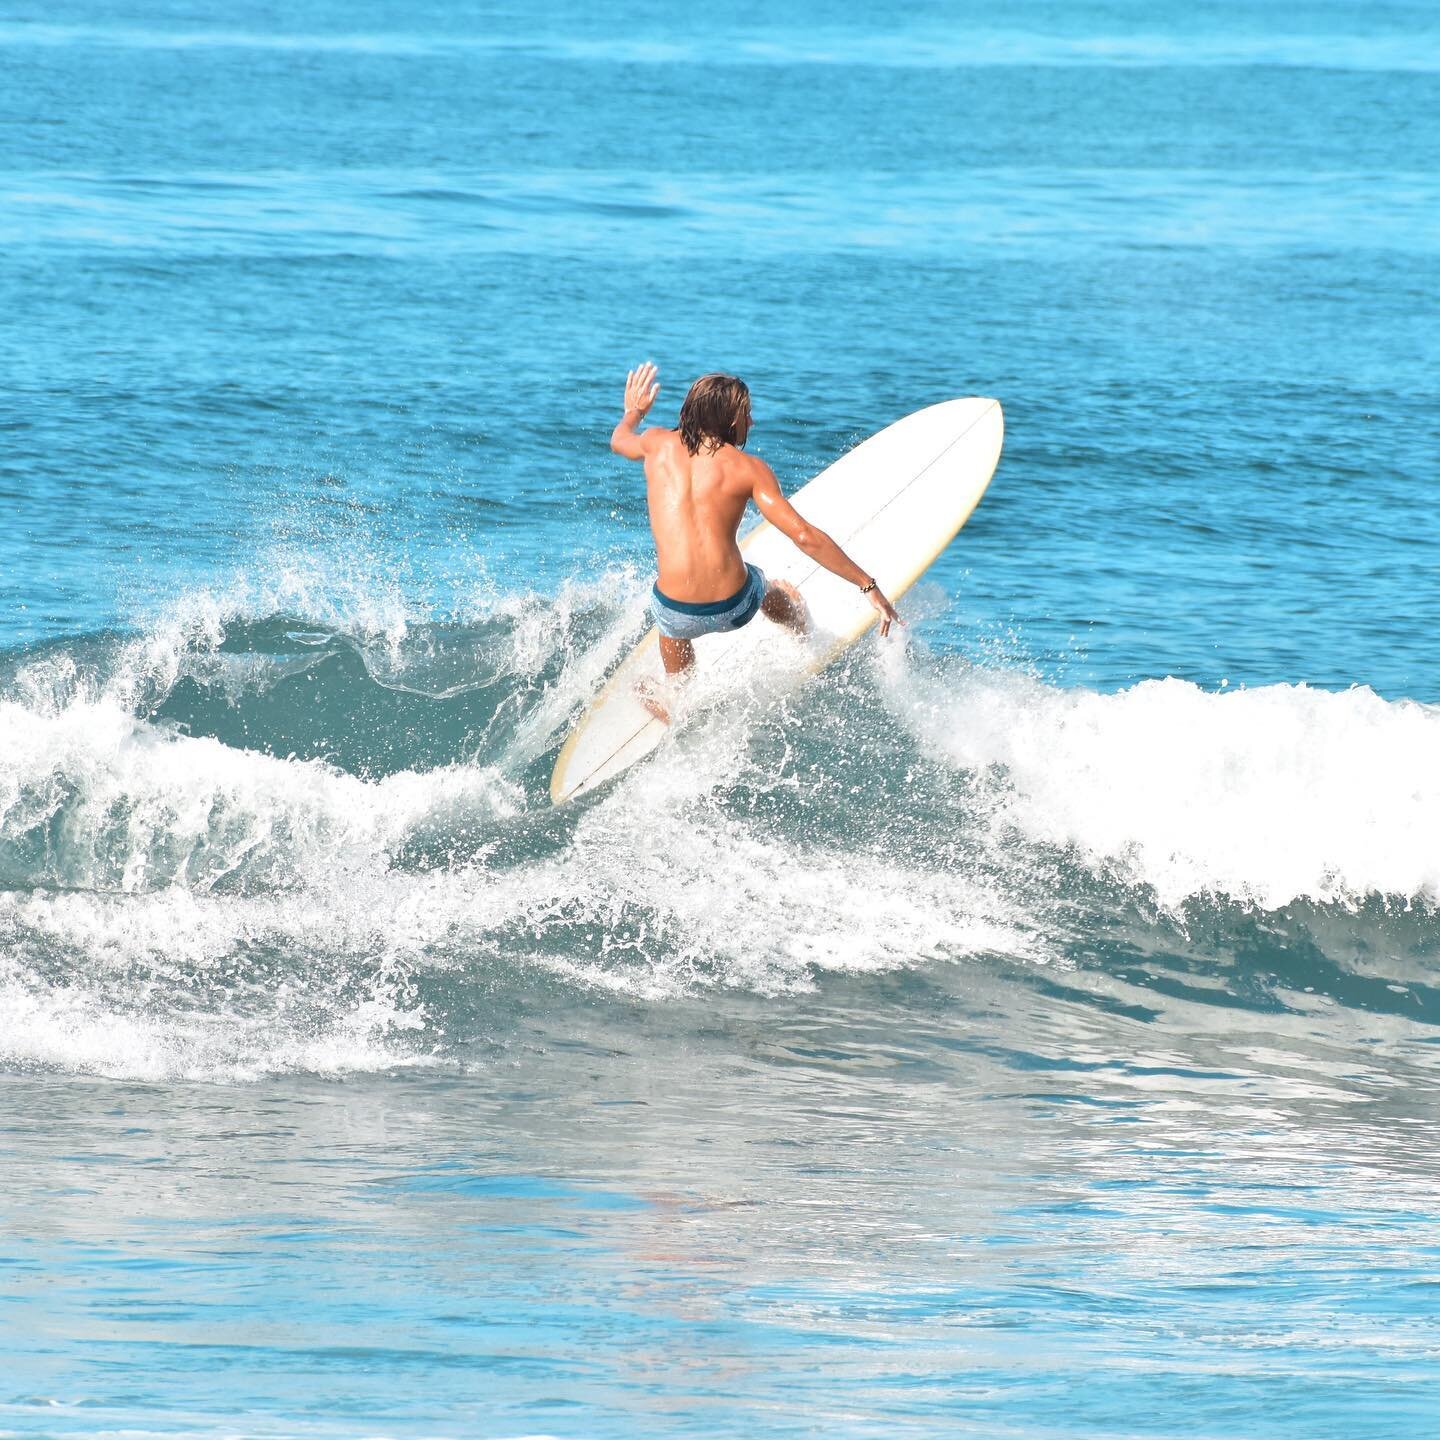 Sometimes, in the waves of change, we find our true direction. Inspo Monday as an exciting week is starting. Sending you good vibes from sunny Sayulita.
.
.
📸 @frentealpunto
🏄&zwj;♂️ @zakmignot
🙏 @sayulitalifedotcom